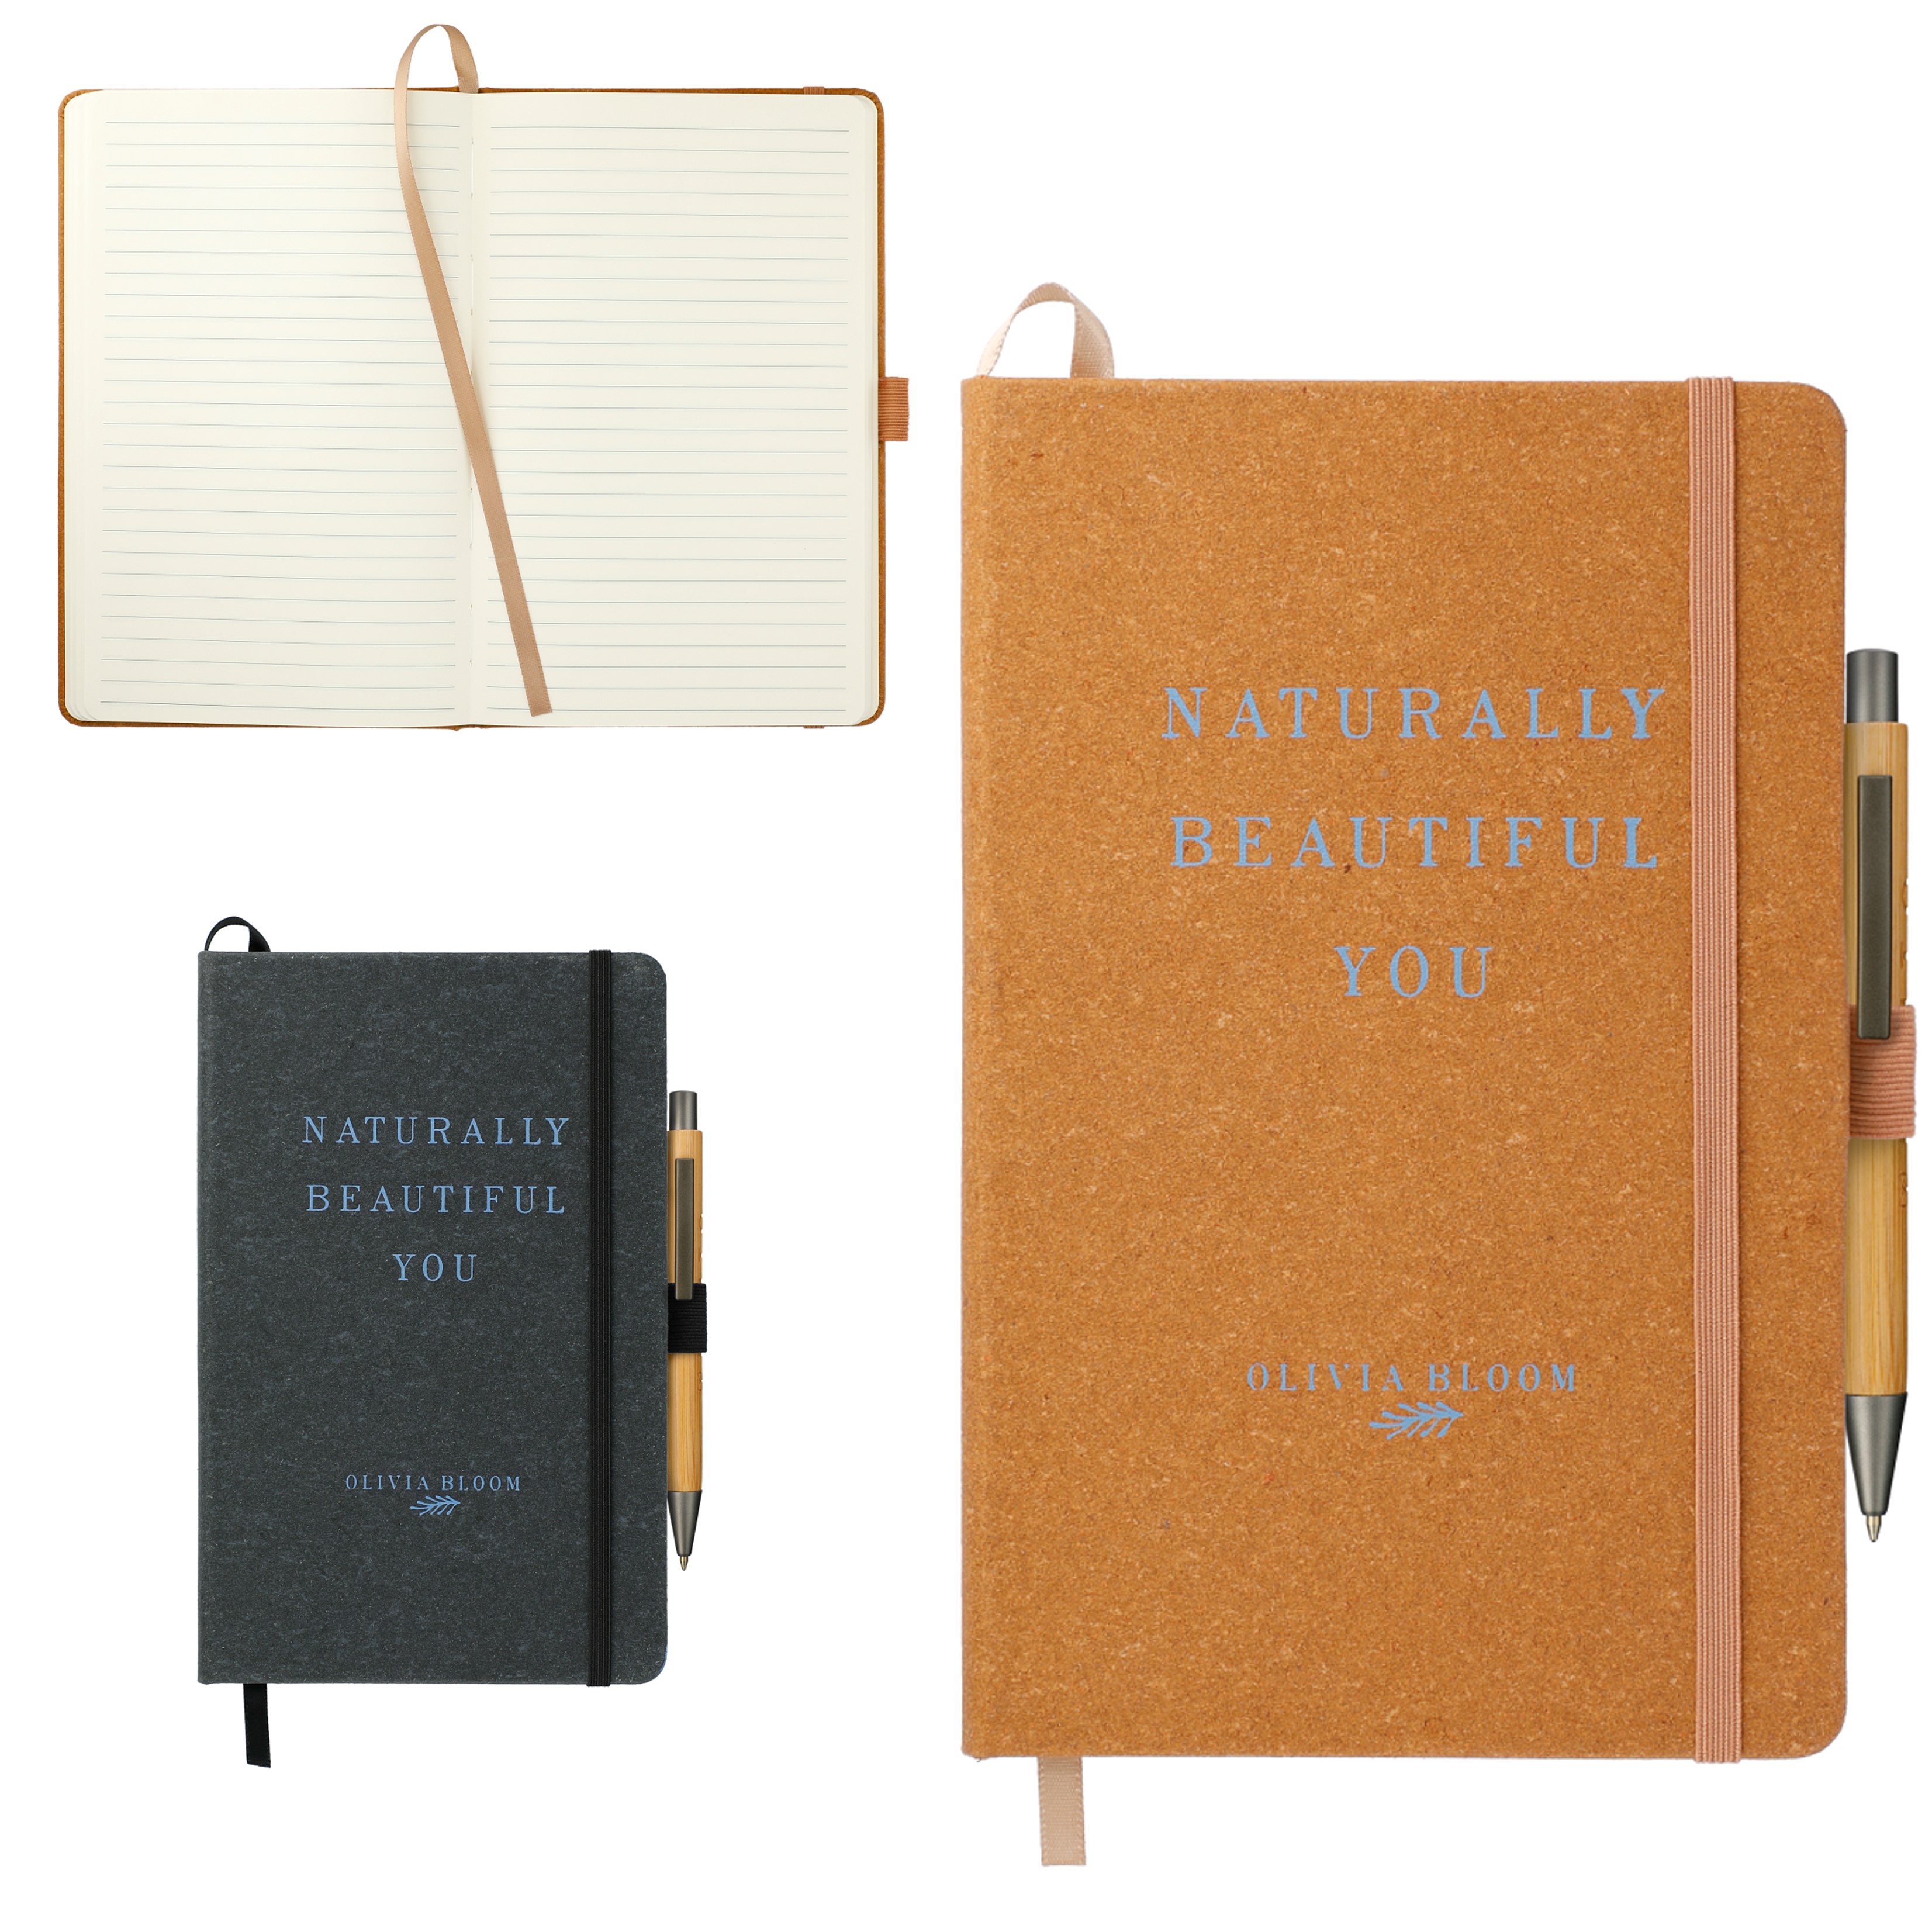 Recycled Leather Journal and Bamboo Pen Set | 5x8